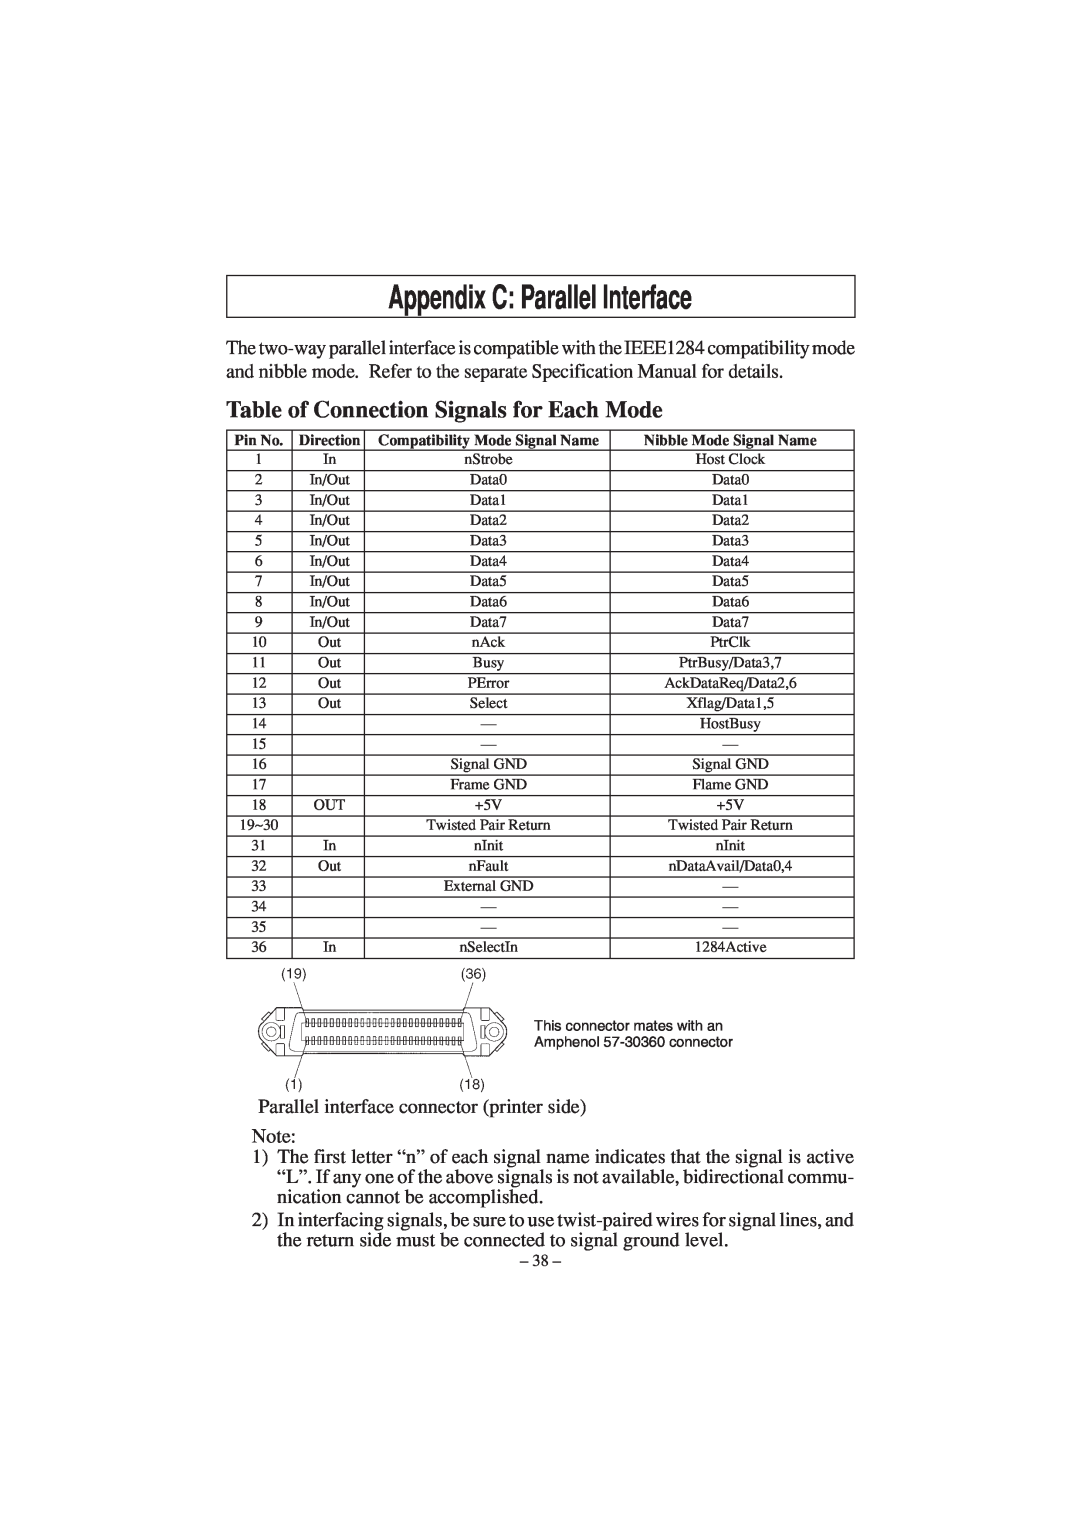 Star Micronics TSP1000 user manual Appendix C Parallel Interface, Table of Connection Signals for Each Mode 